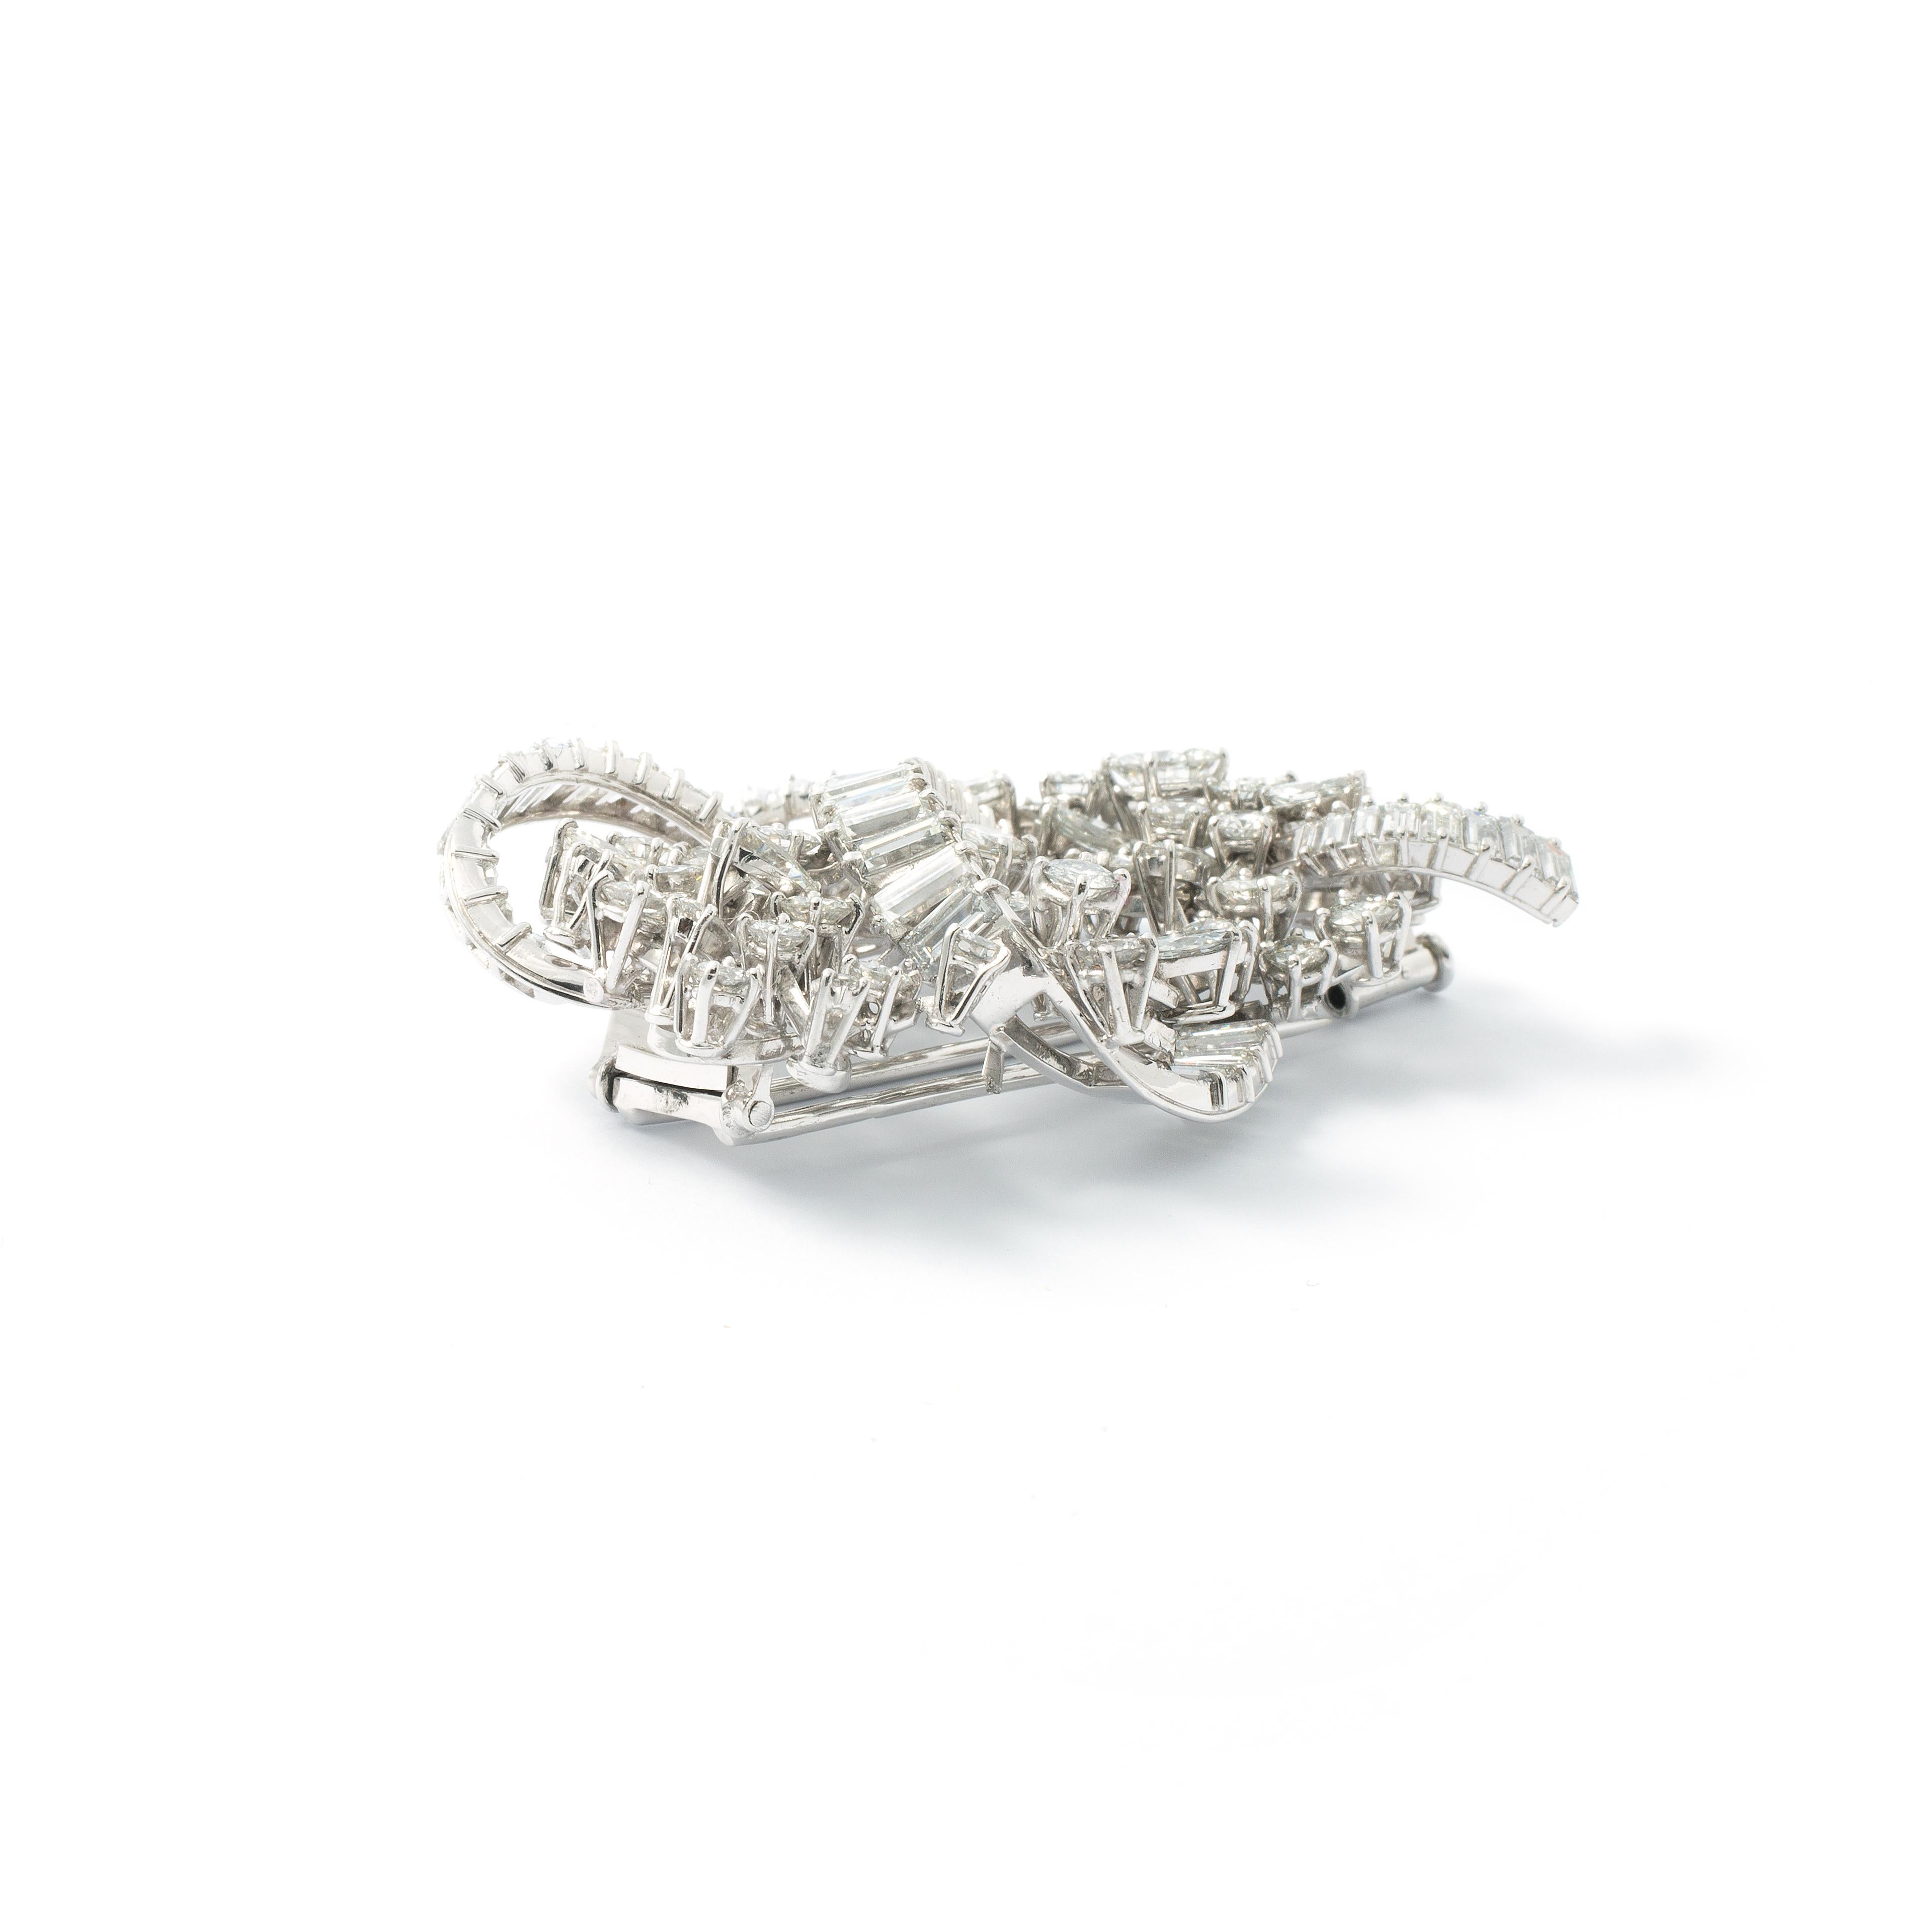 Diamond and Platinum Brooch.
Baguette cut Diamonds: approx. 4.80 carats.
Round cut and Marquise cut Diamonds: 10.80 carats.
Size: 5.50 x 4.00 cm.
Gross weight: 26.88 grams.